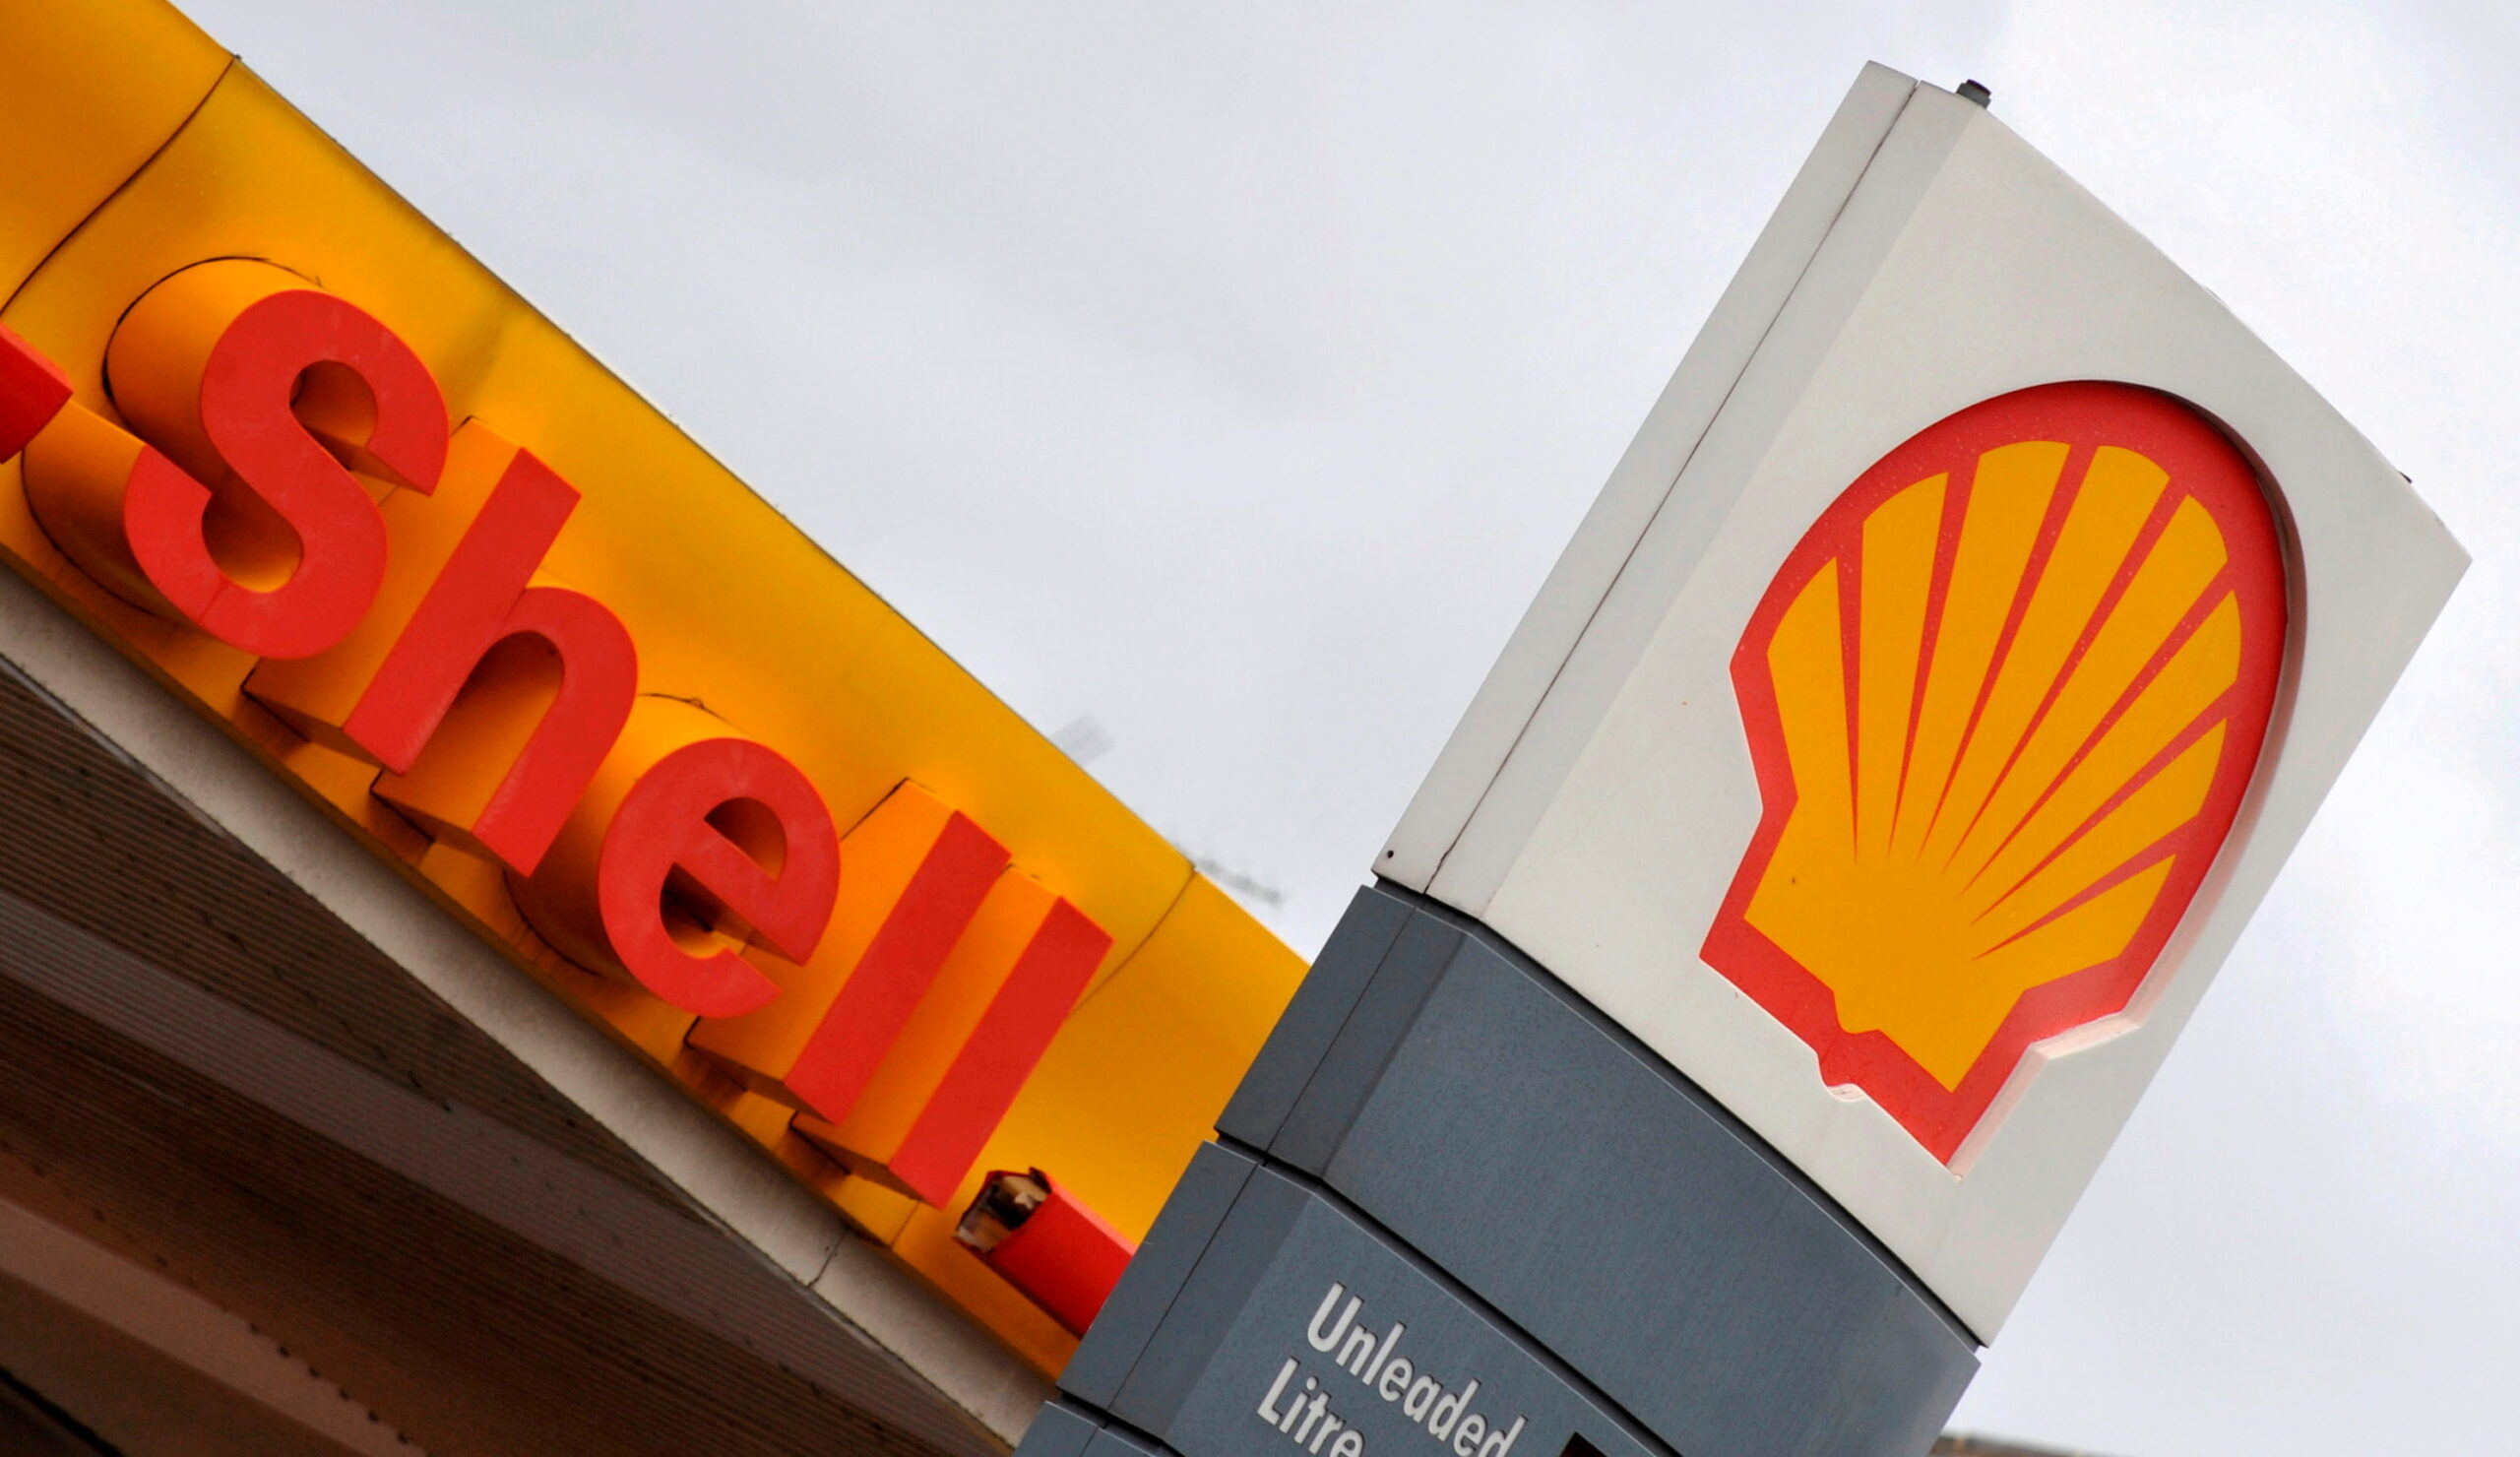  Shell unveils carbon capture project in Canada’s Alberta province